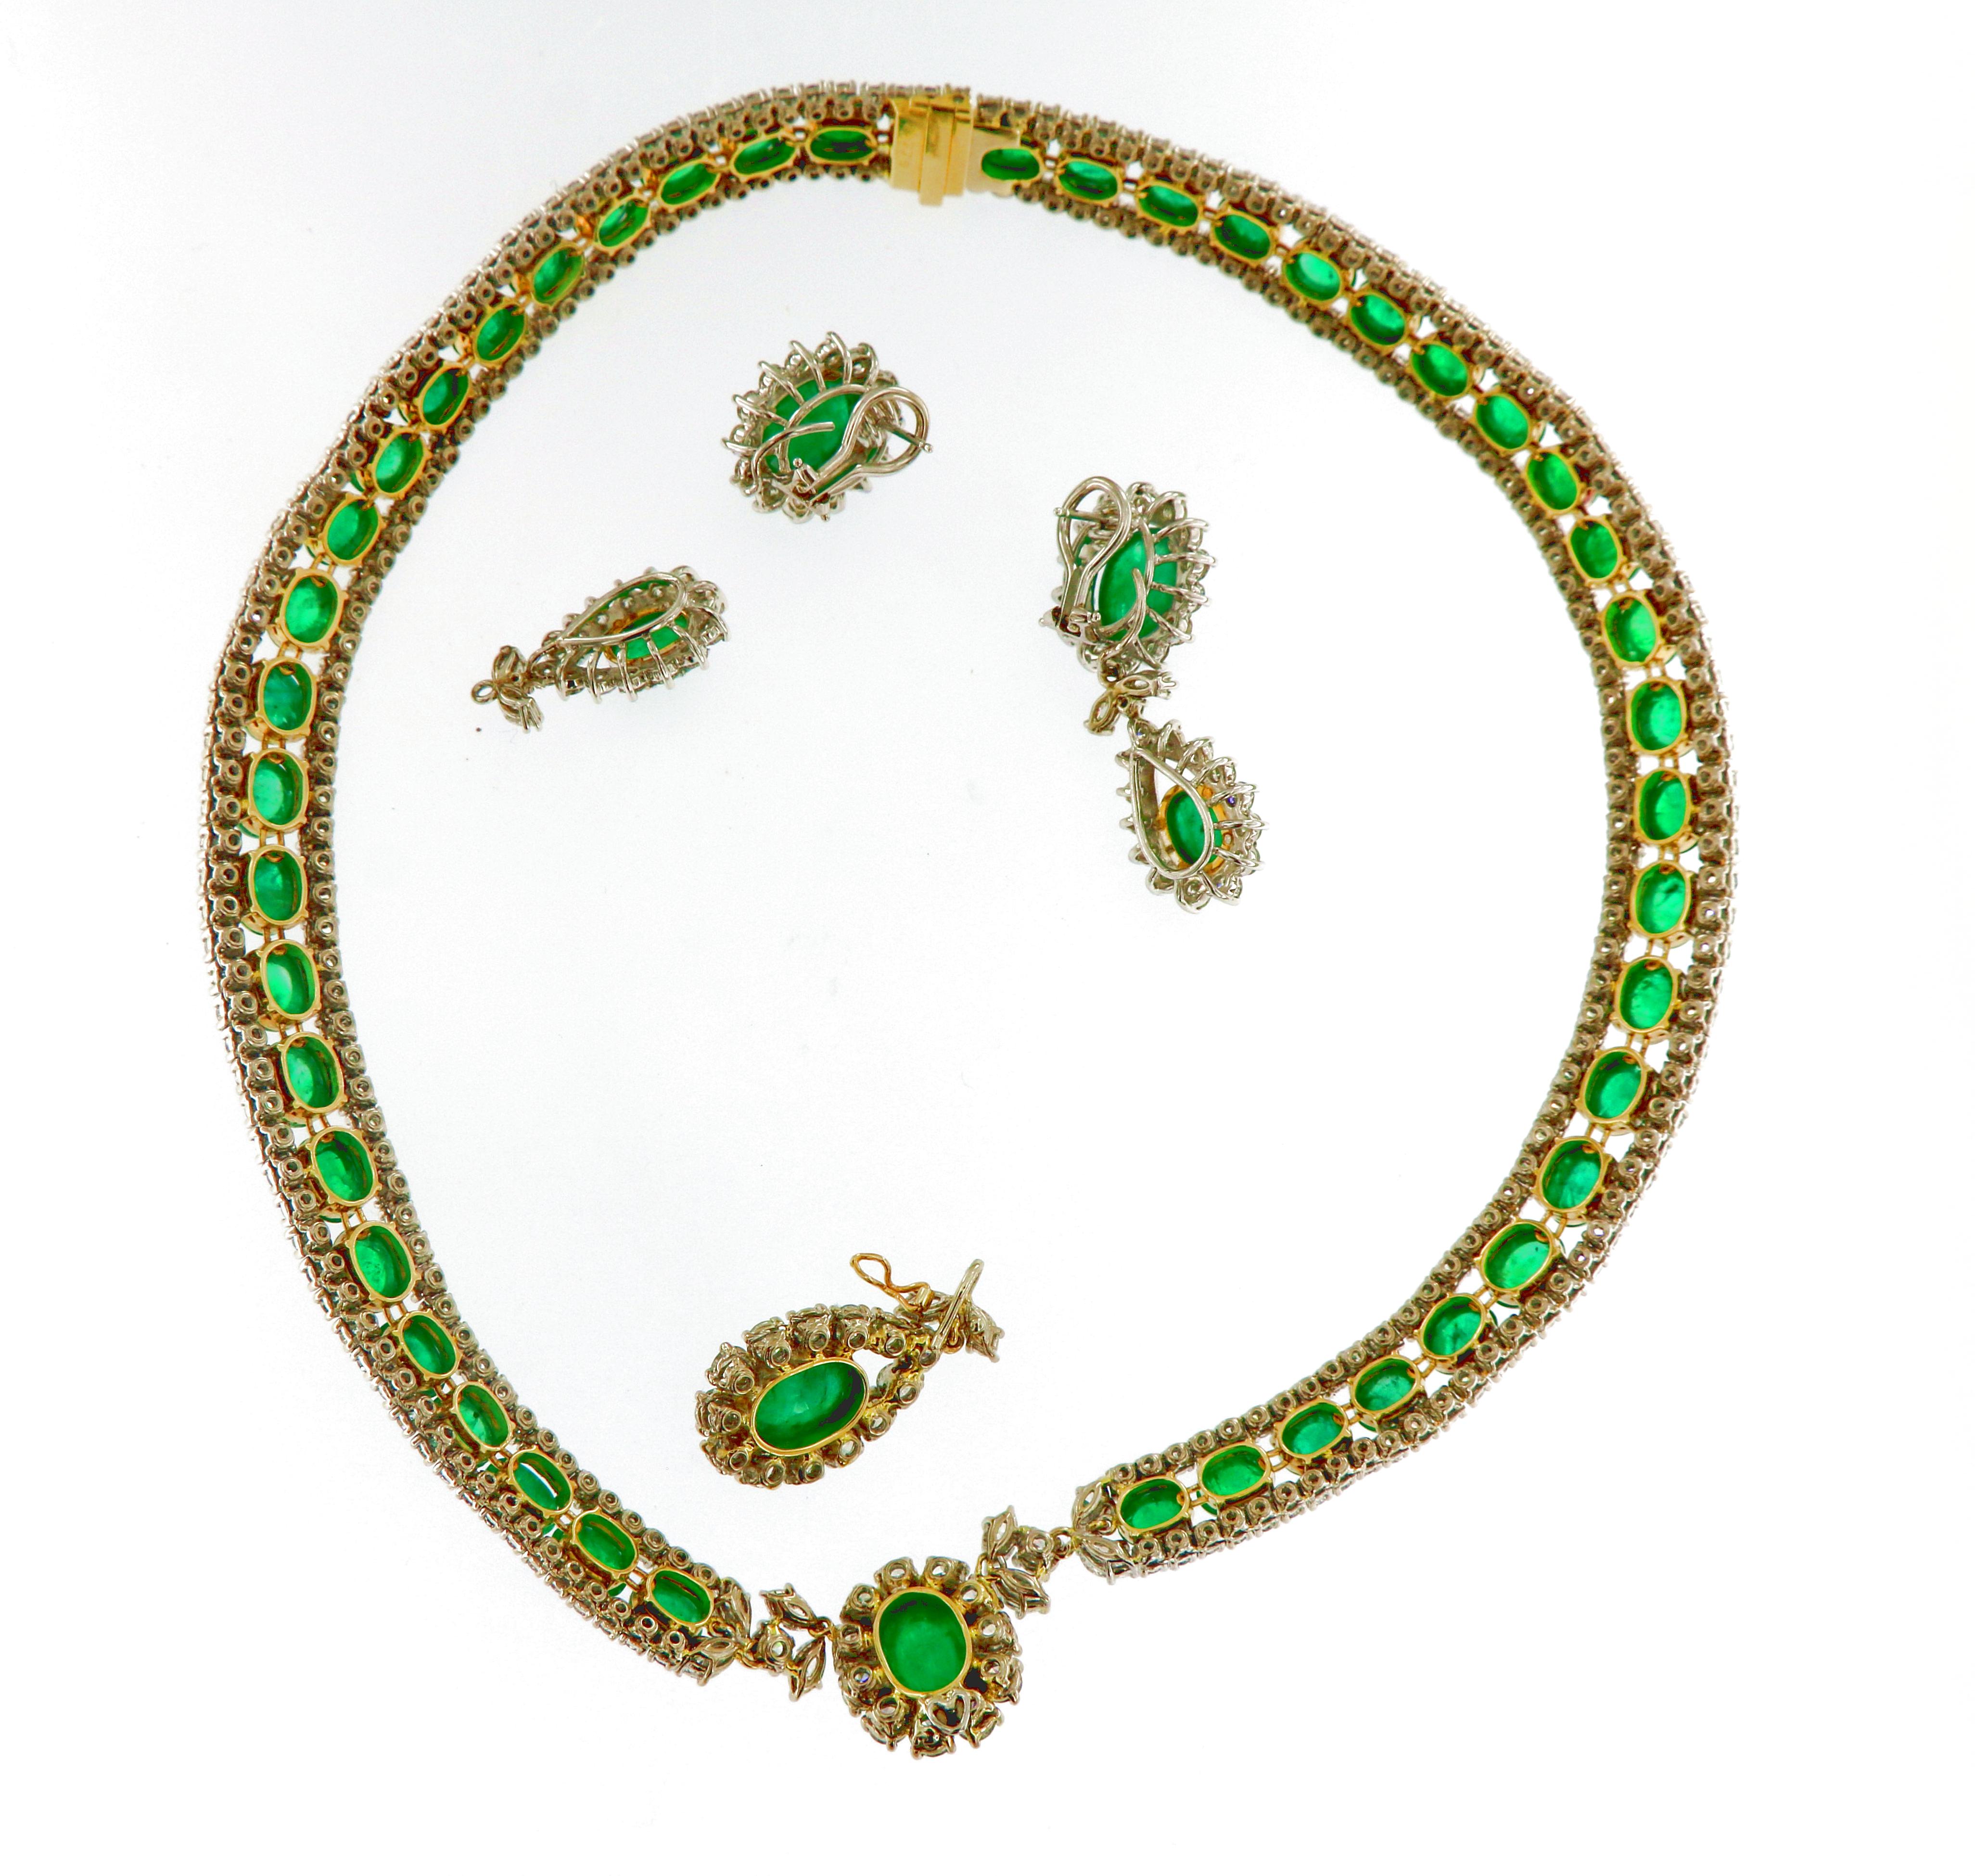 Women's Vintage 125 Carat Russian Emeralds and Diamonds Necklace and Earring Circa 1960 